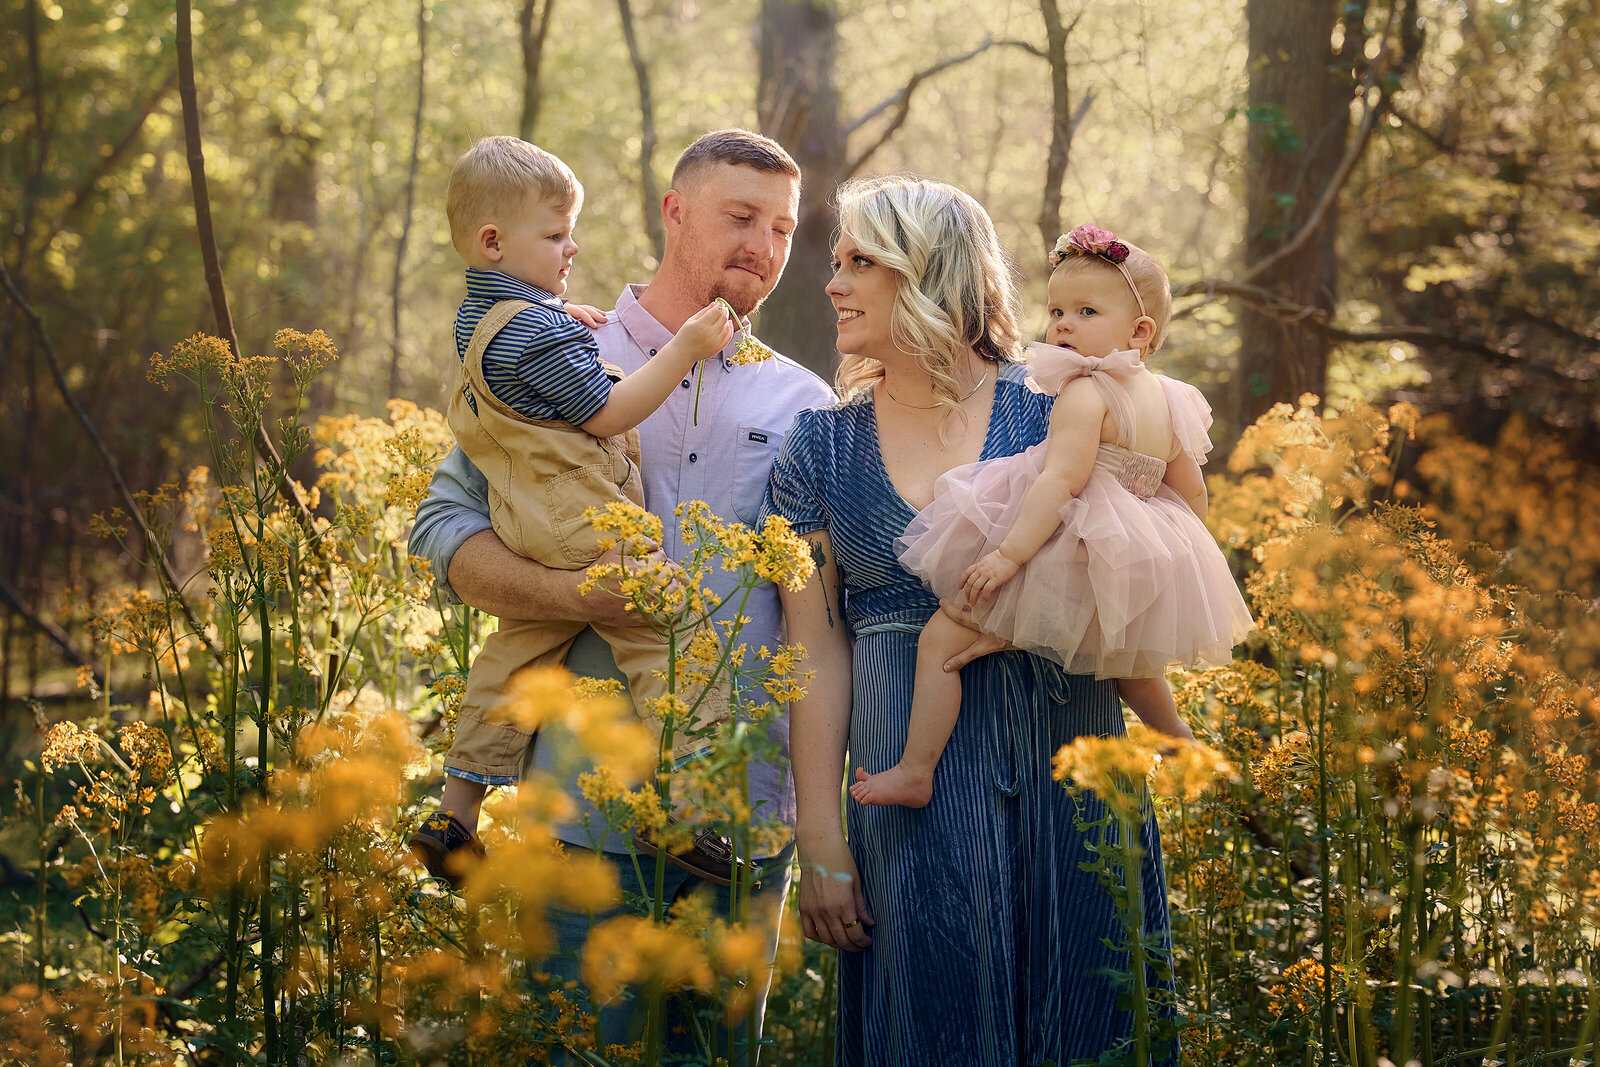 atlanta-best-award-winning-family-portrait-outdoor-spring-fall-woods-wild-flowers-photoshoot-photography-photographer-twin-rivers-02